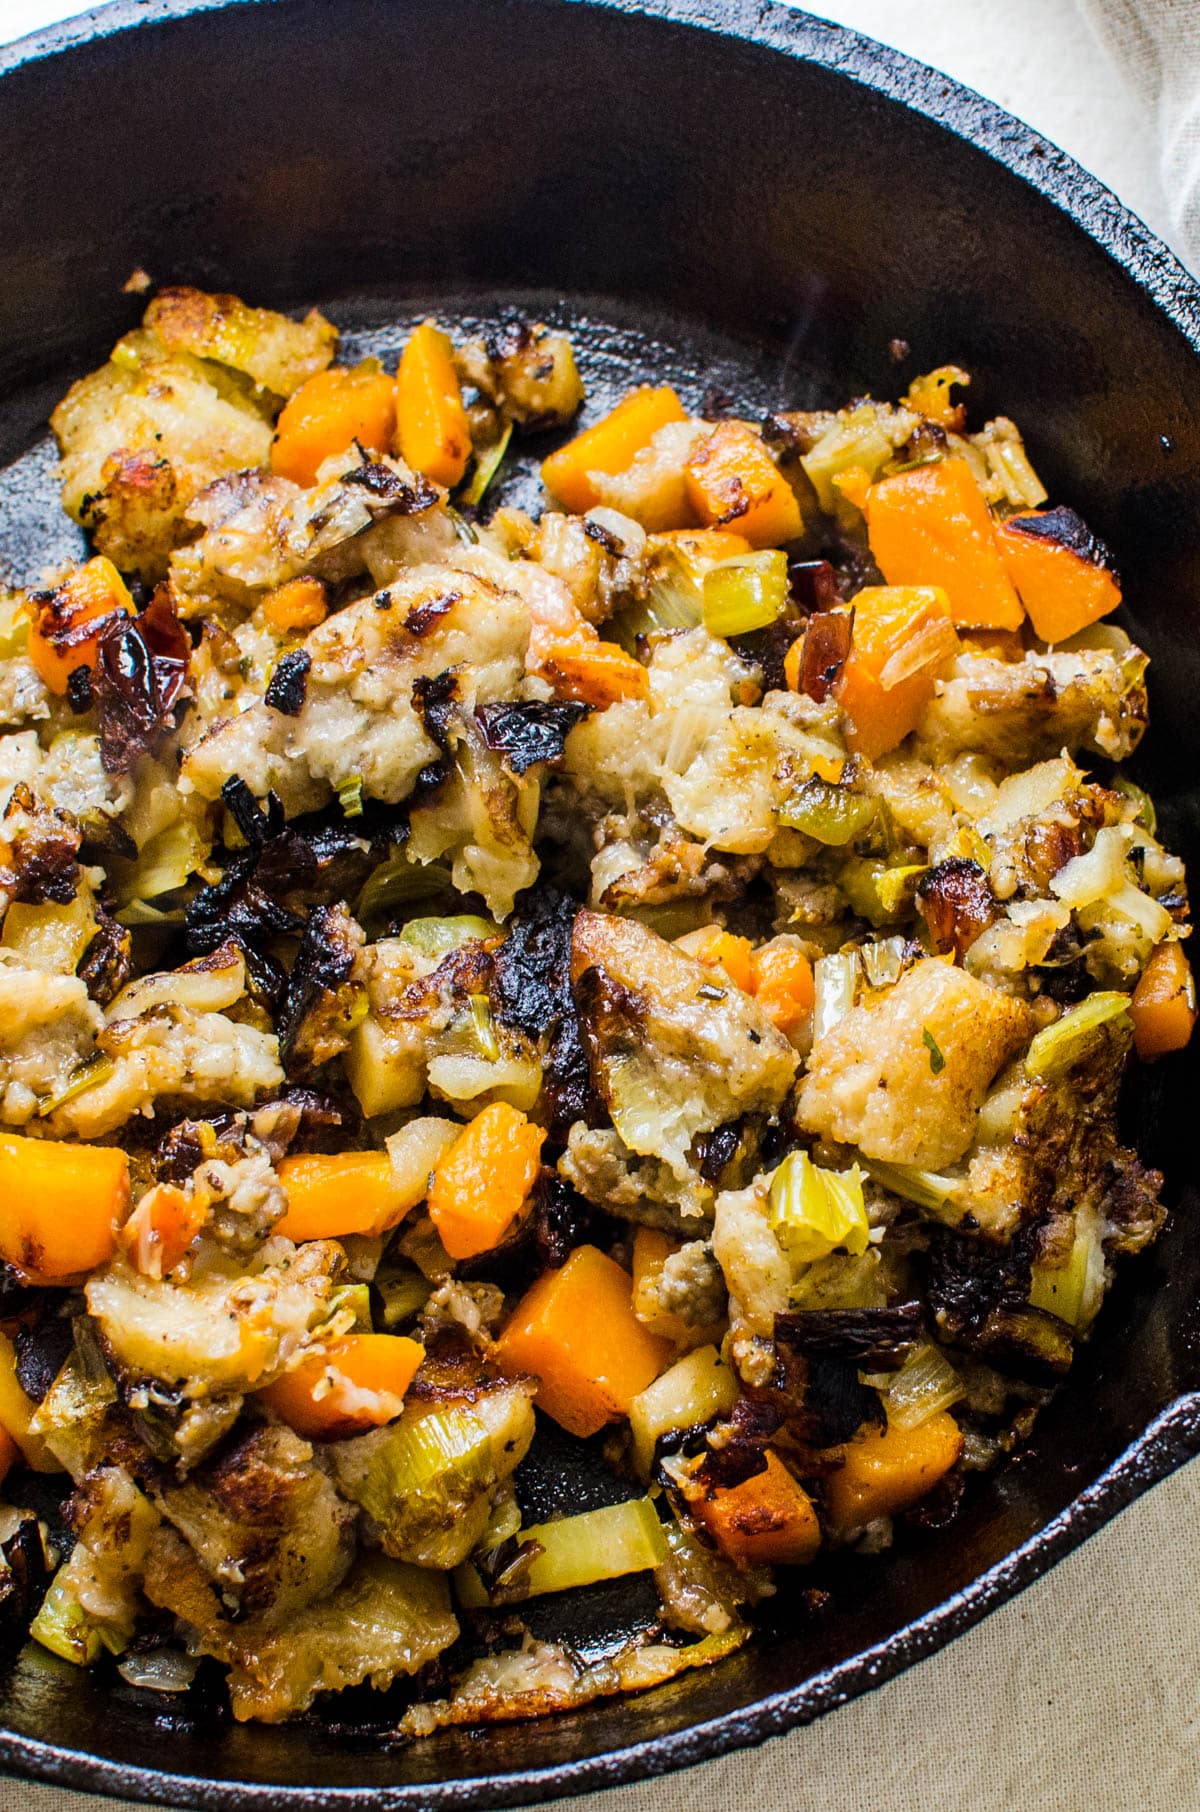 cooking the stuffing in a hot cast iron skillet until it's crusty.